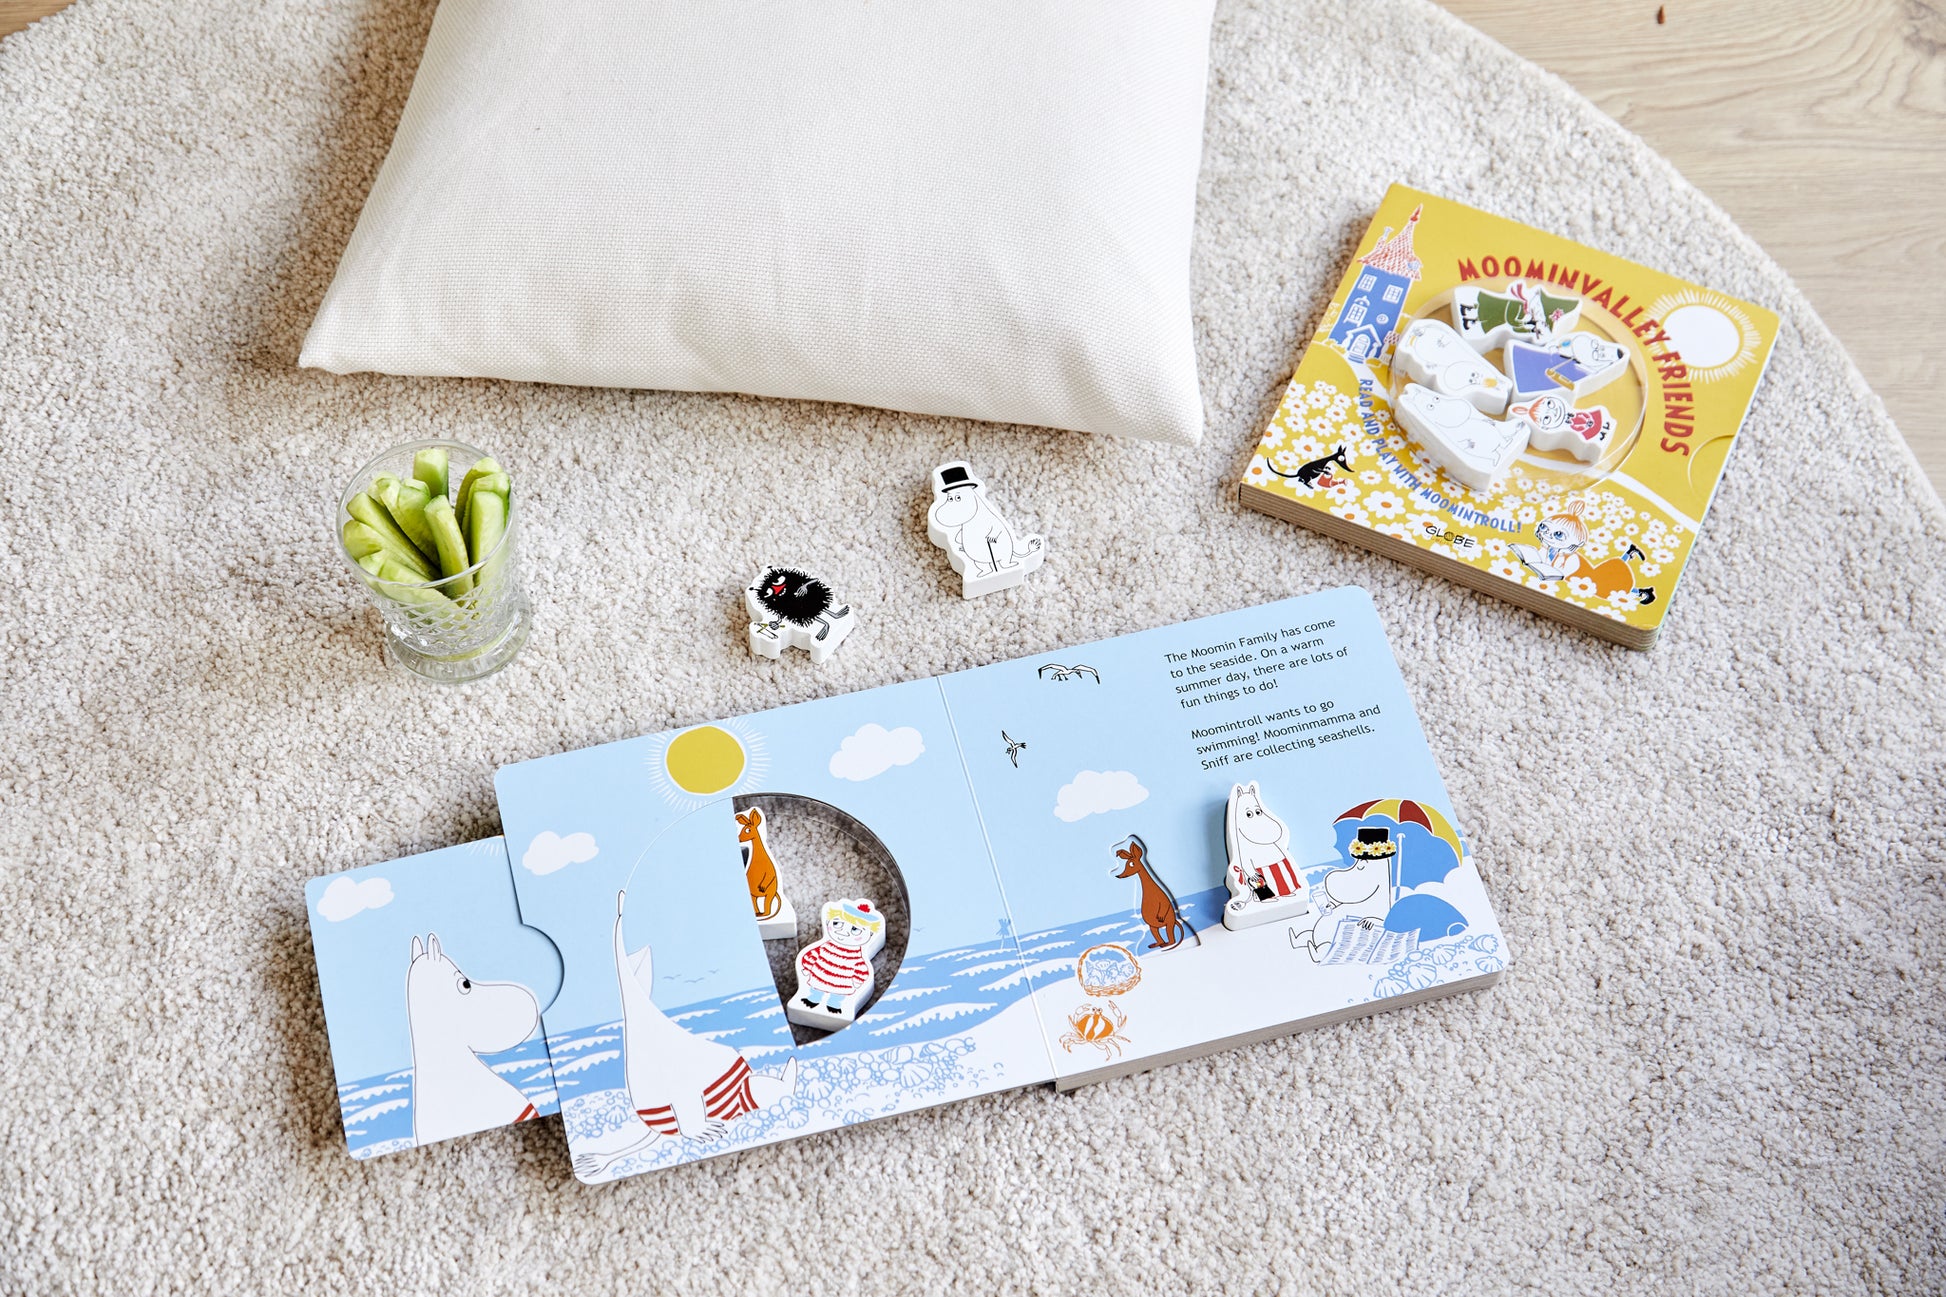 Moomin Valley friends book with wooden figures